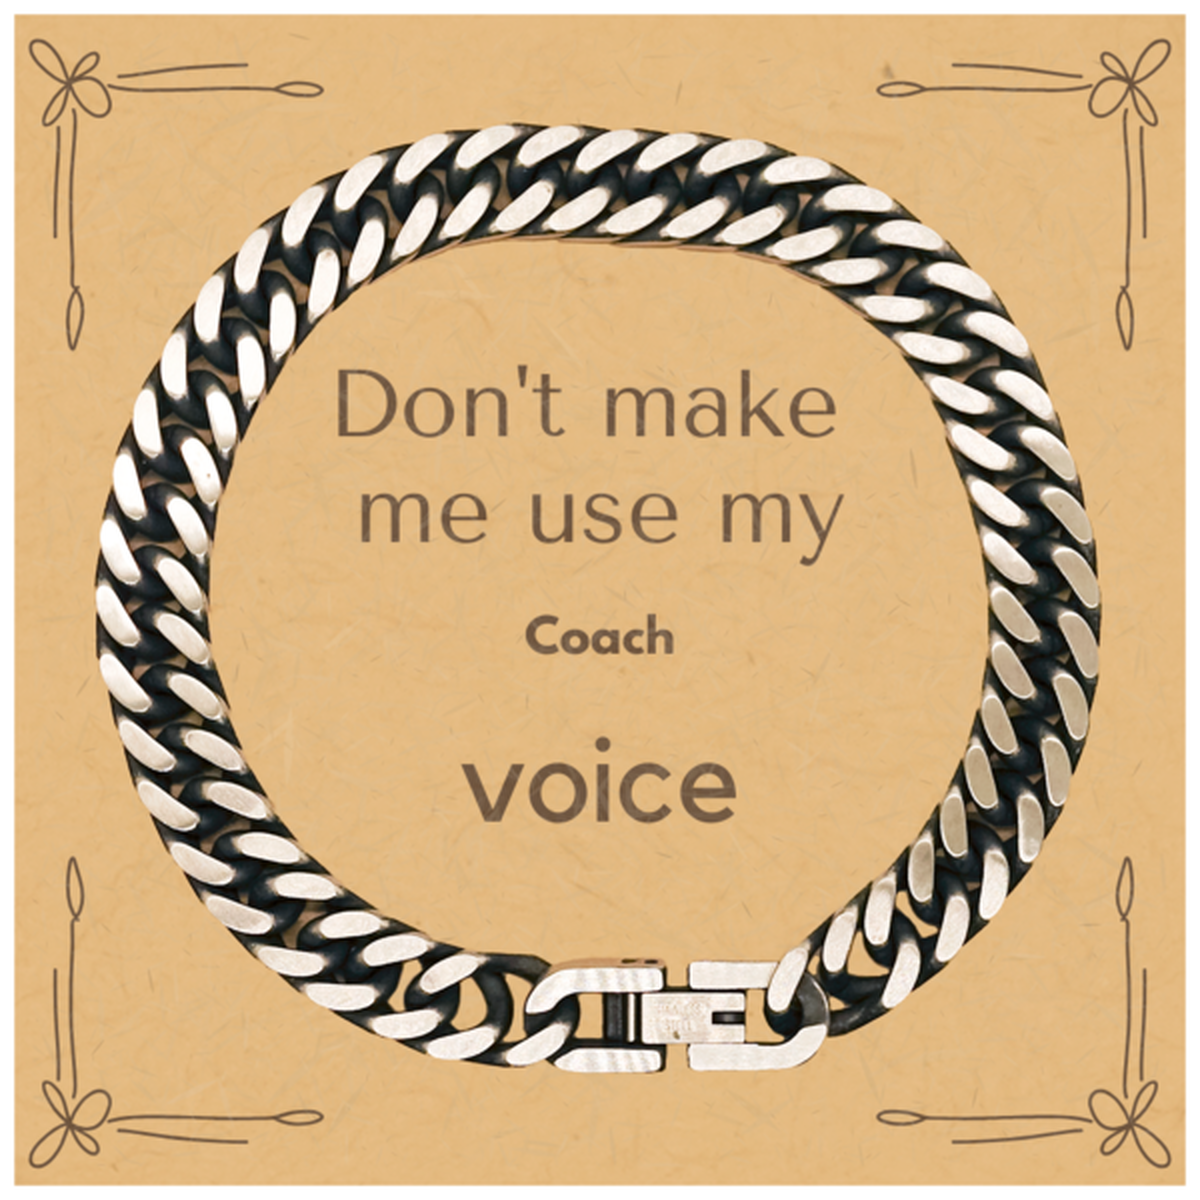 Don't make me use my Coach voice, Sarcasm Coach Card Gifts, Christmas Coach Cuban Link Chain Bracelet Birthday Unique Gifts For Coach Coworkers, Men, Women, Colleague, Friends